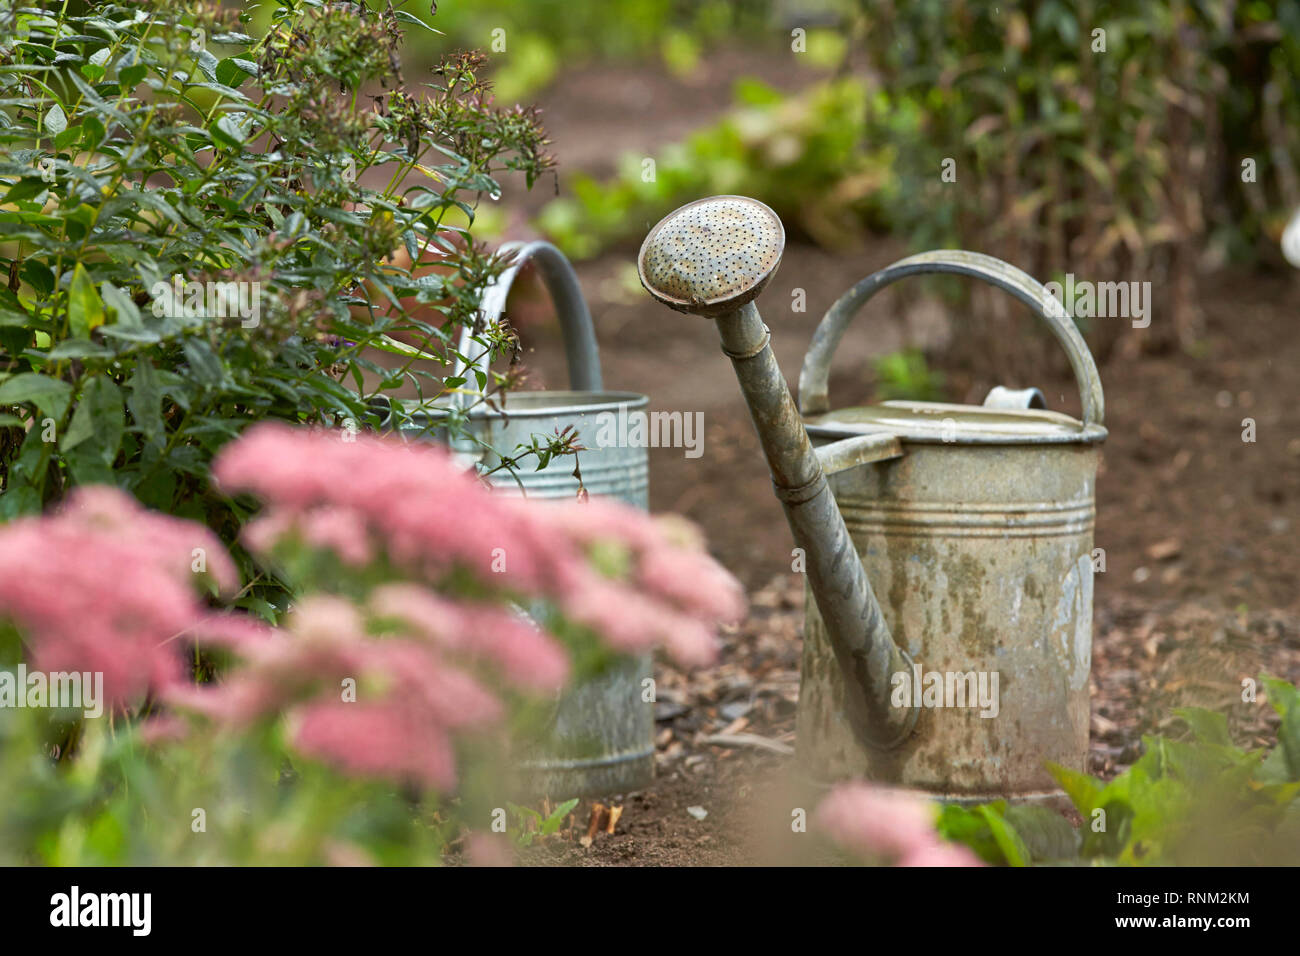 Watering cans made of metal in a garden. Germany Stock Photo